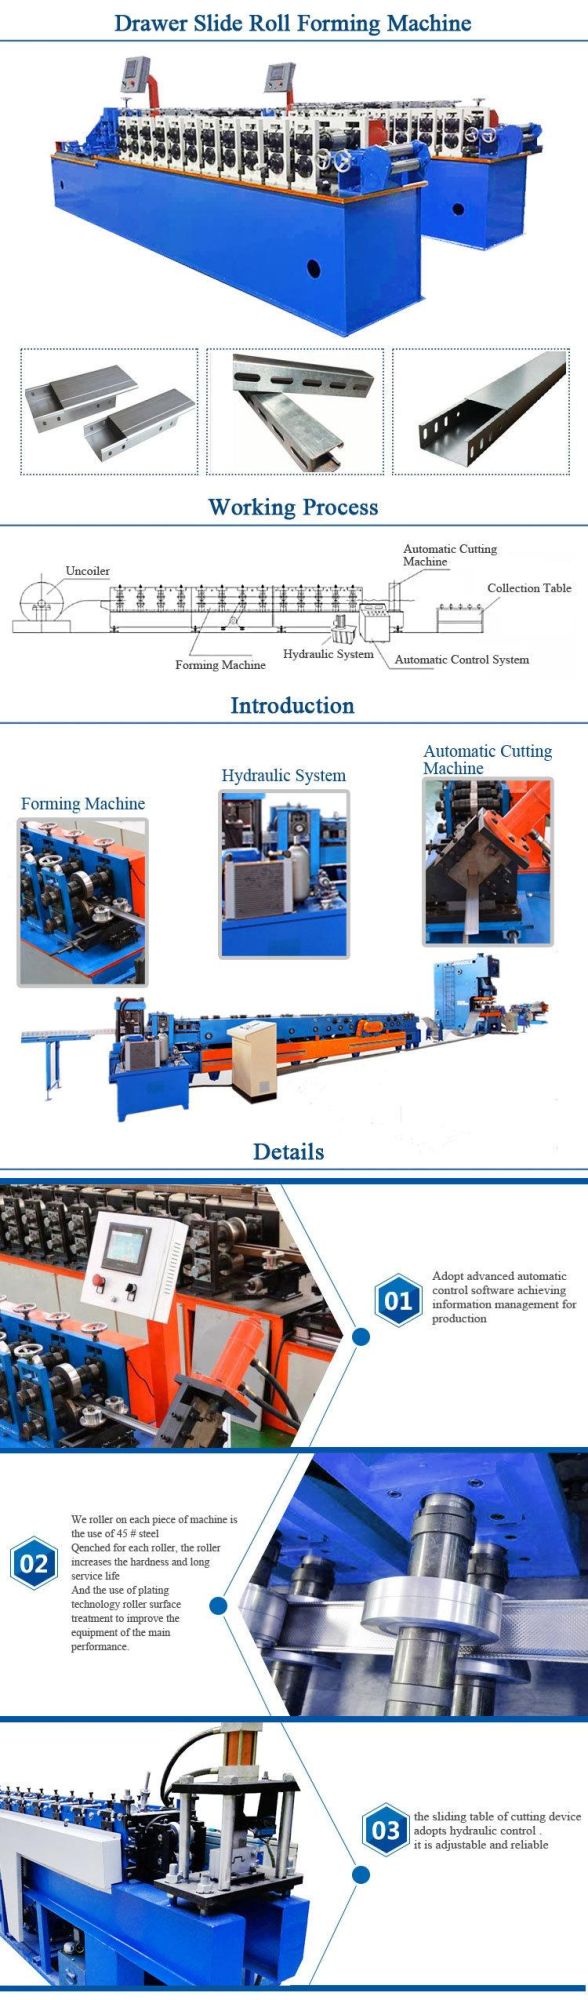 Carbon Steel Electrical Cable Trays Mounting Accessories Roll Forming/Making Machine